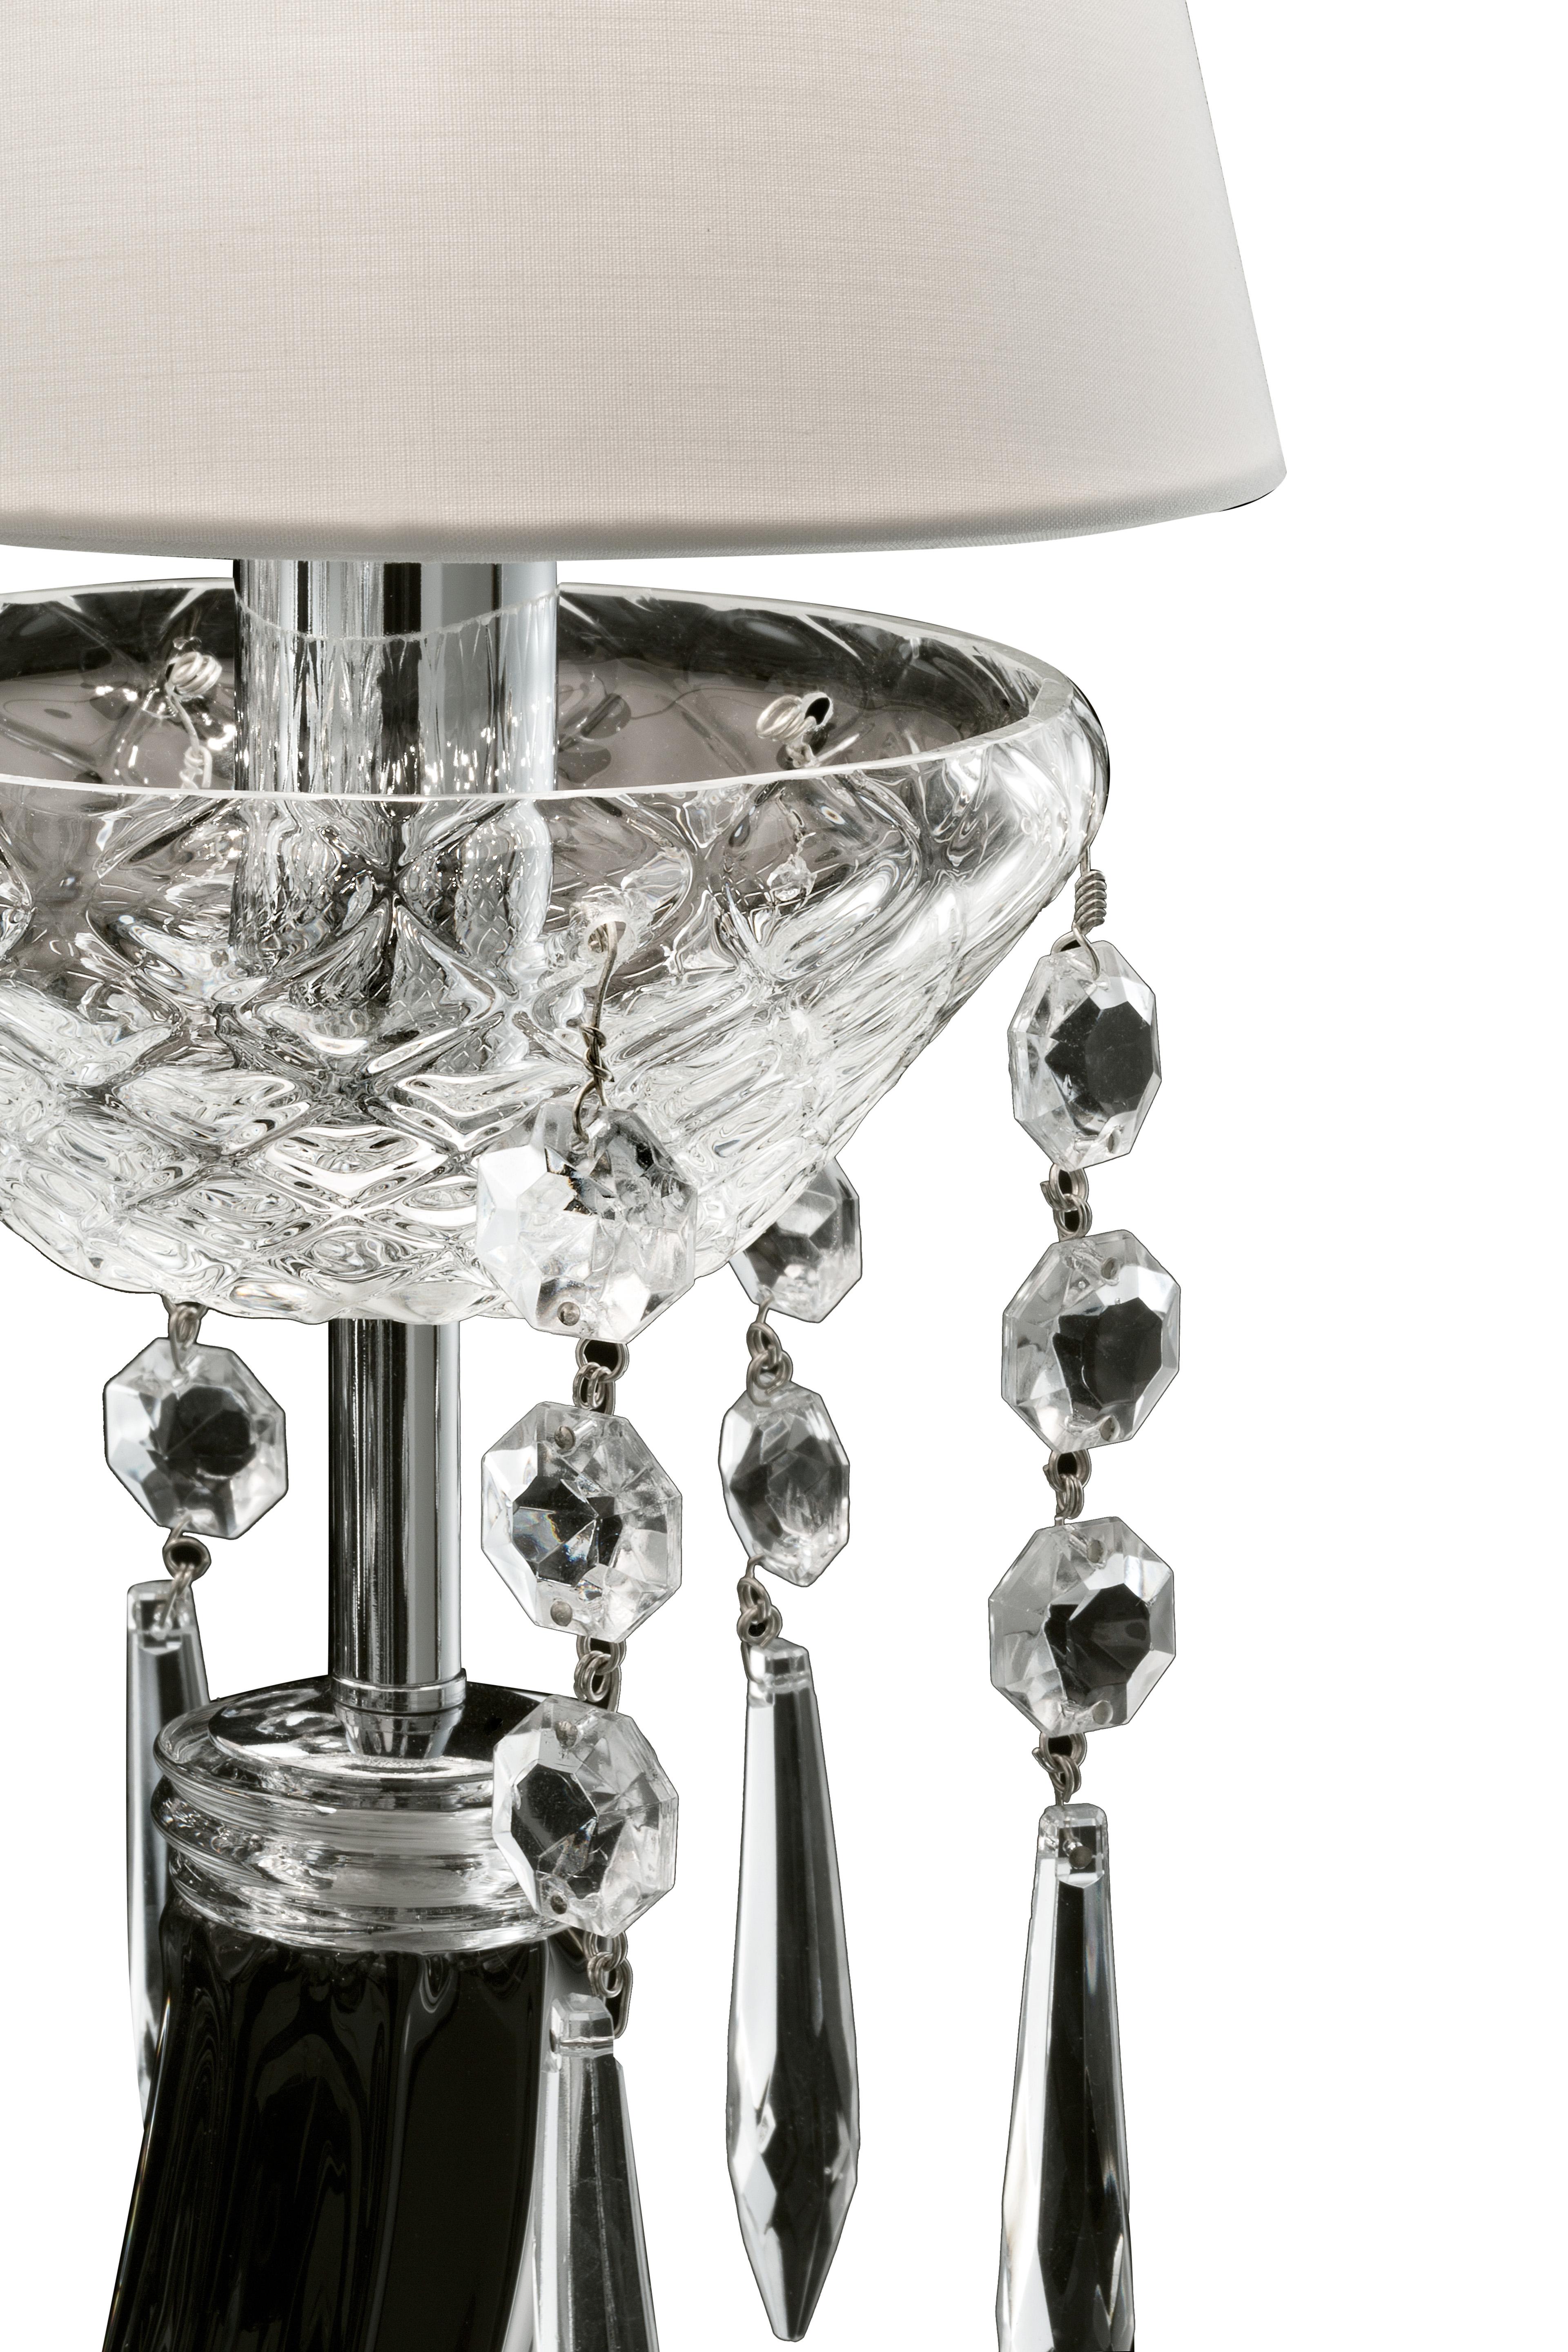 Black (Black_NN) President 5695 14 Chandelier in Glass with White Shade, by Barovier & Toso 4